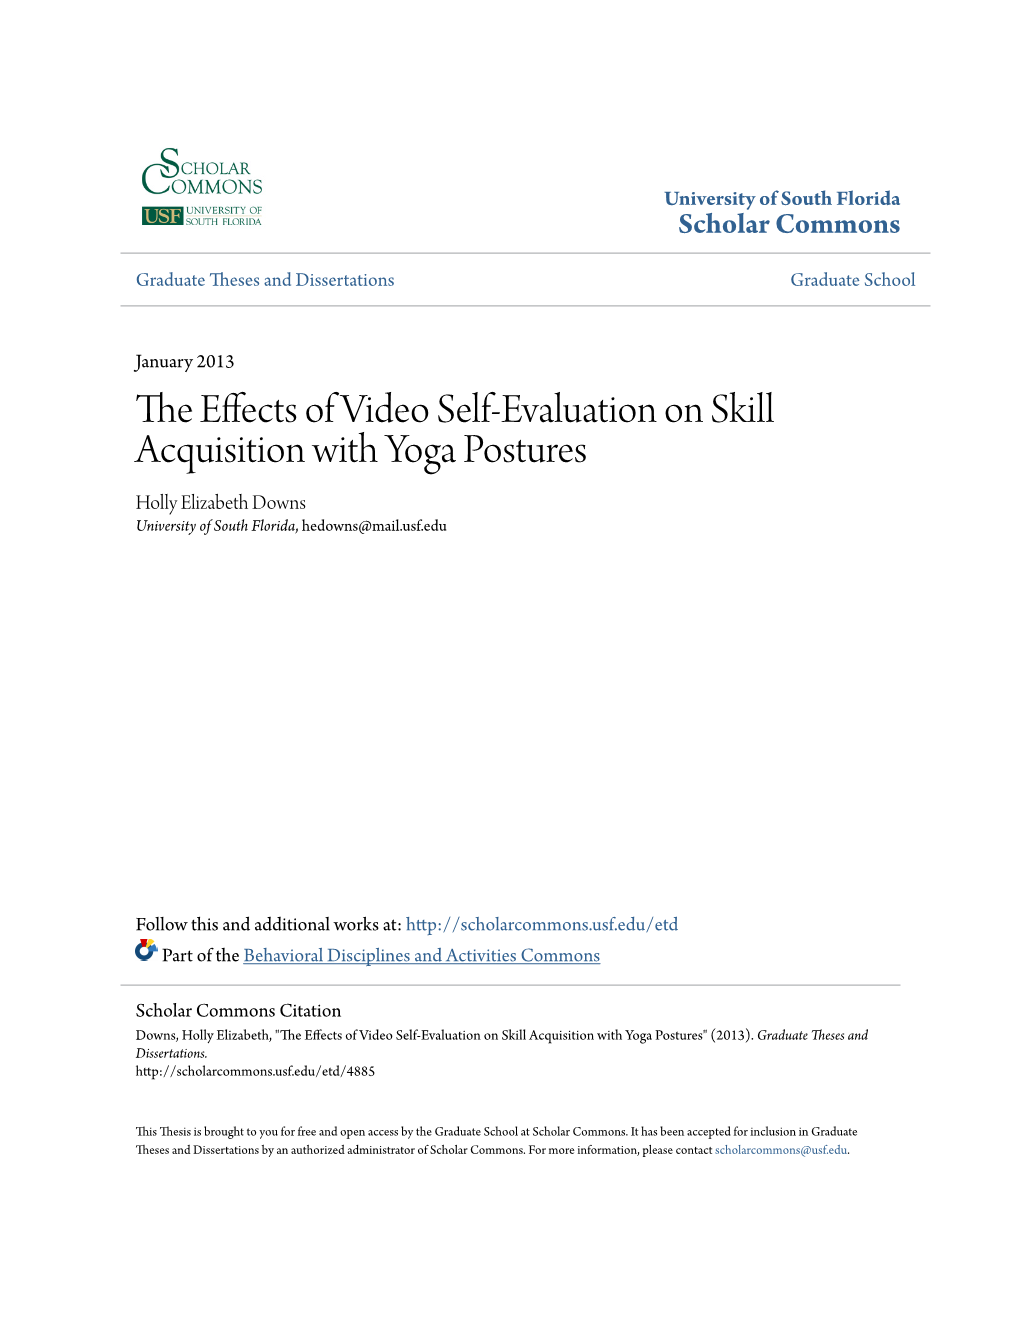 The Effects of Video Self-Evaluation on Skill Acquisition with Yoga Postures" (2013)